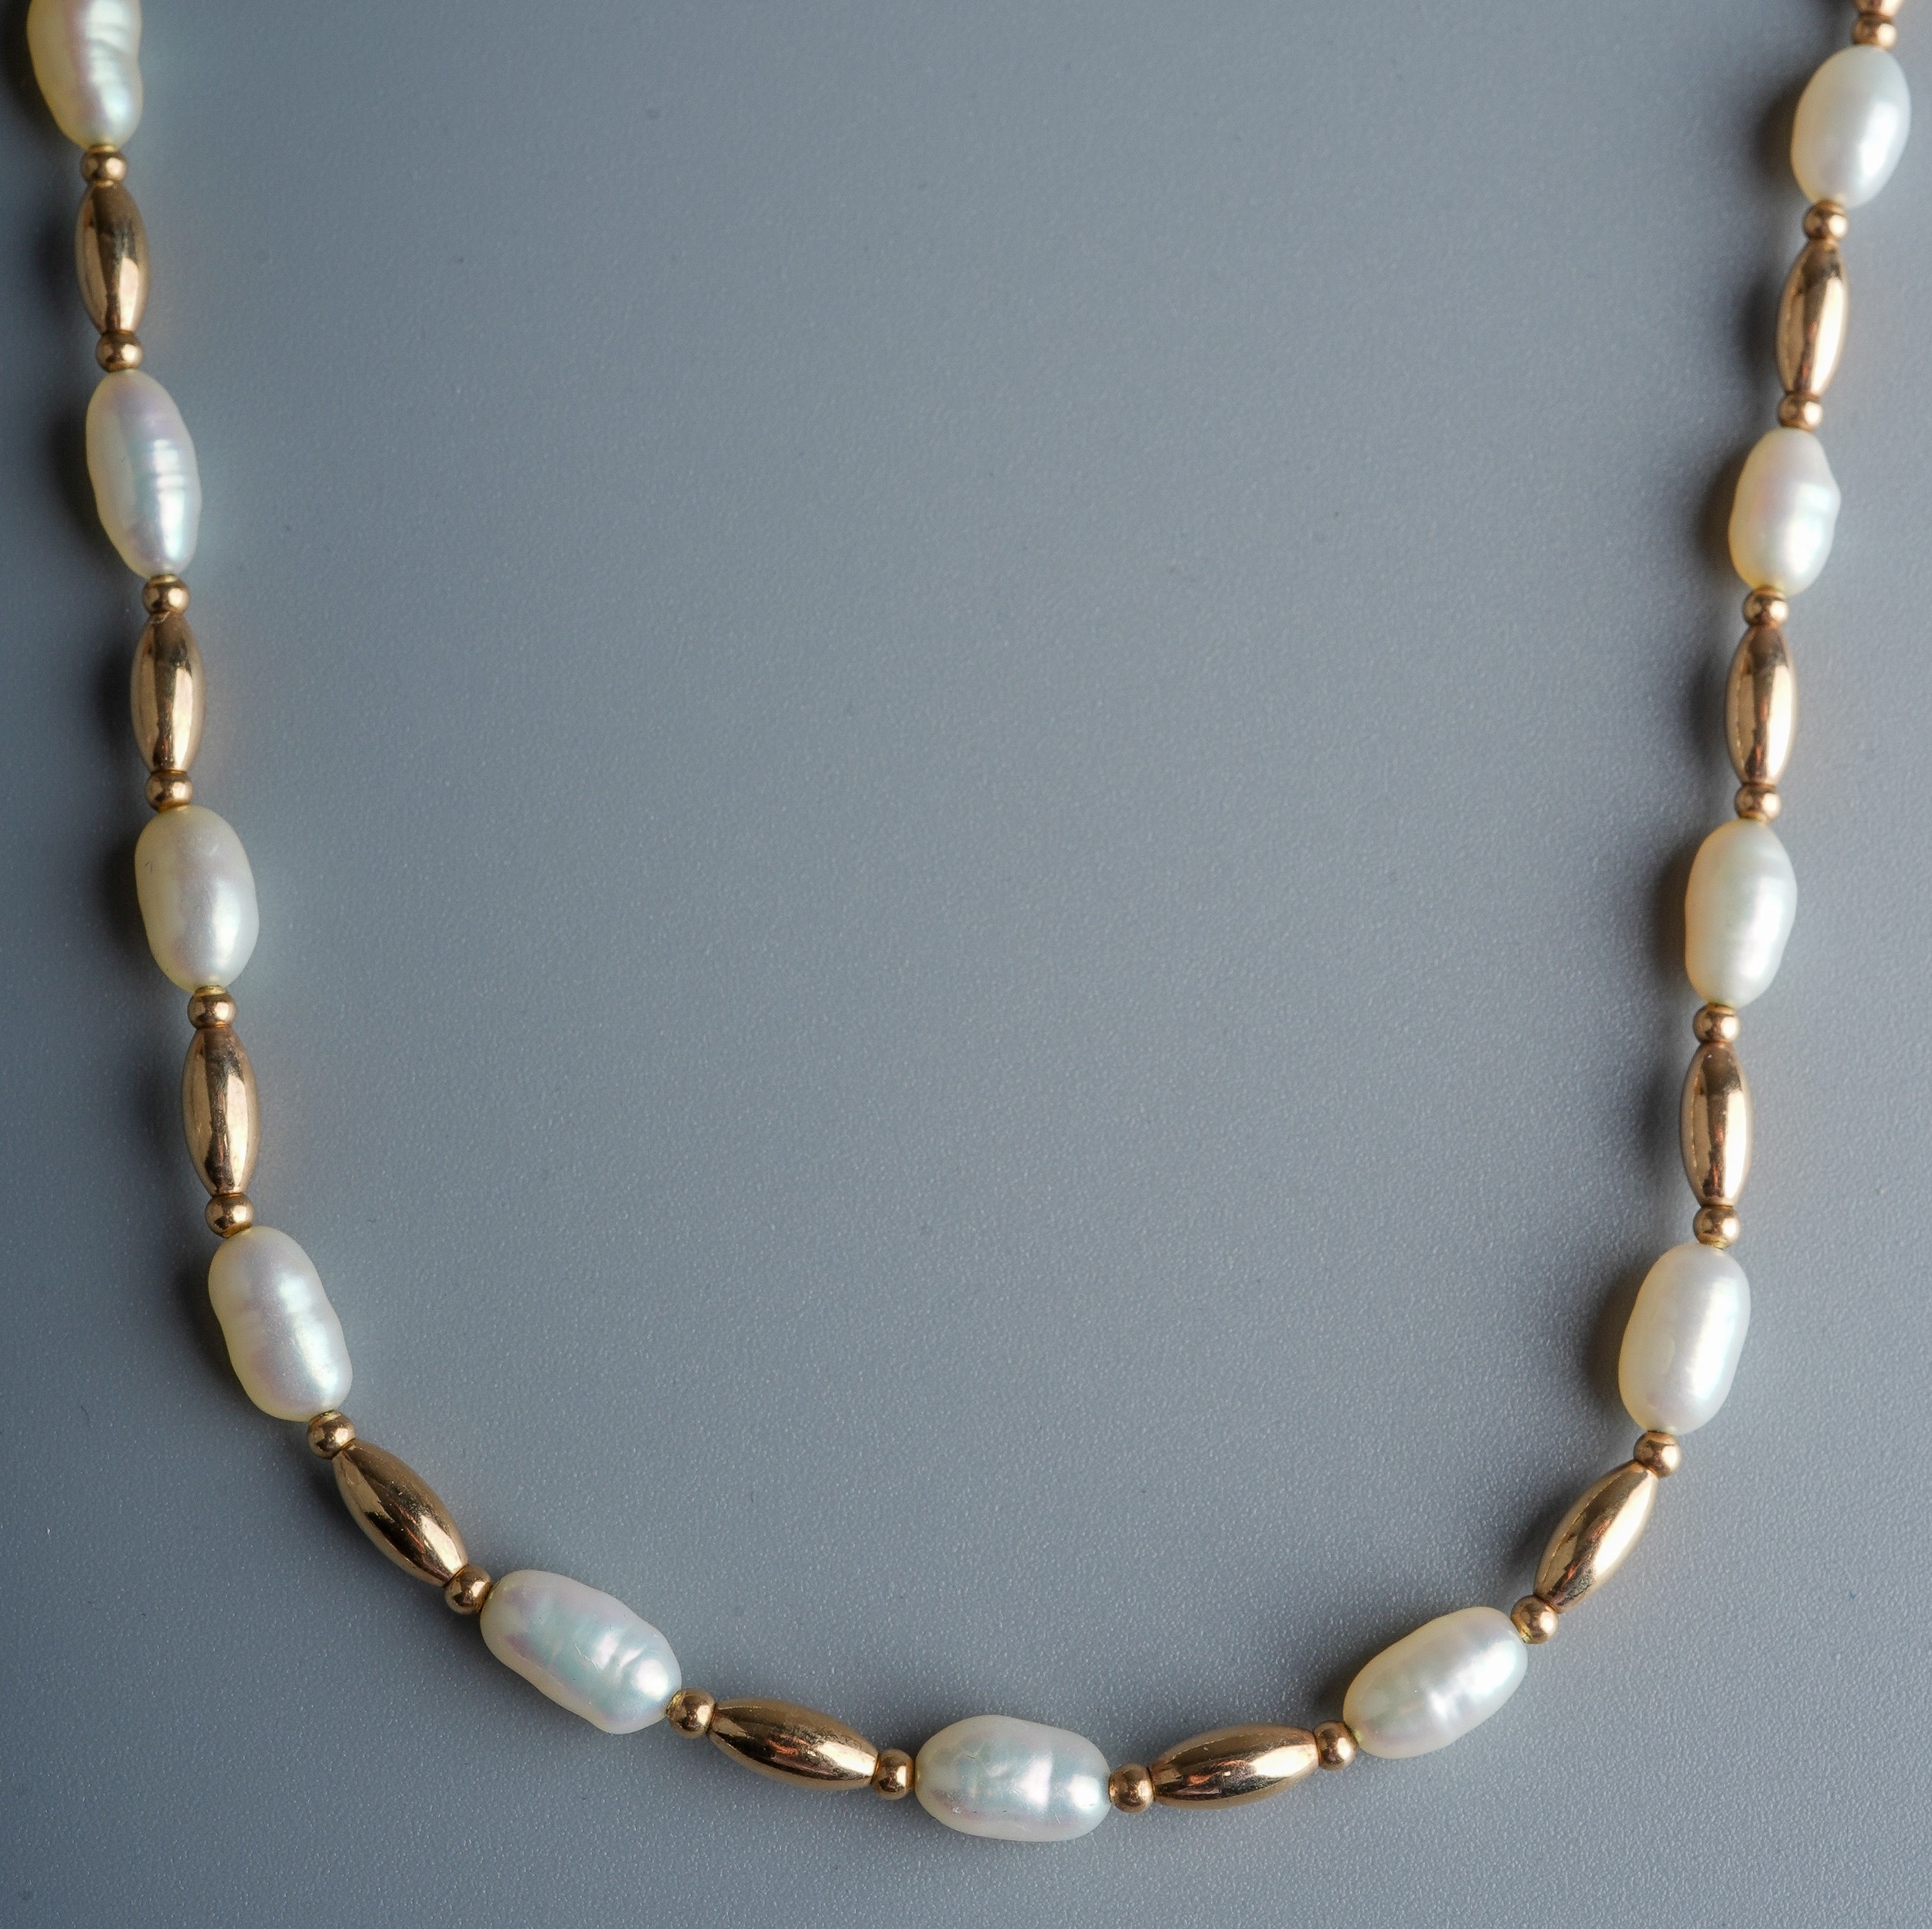 A 9ct gold and pearl necklace and bracelet, set with alternate pearls and gold coloured beads, the - Image 2 of 4